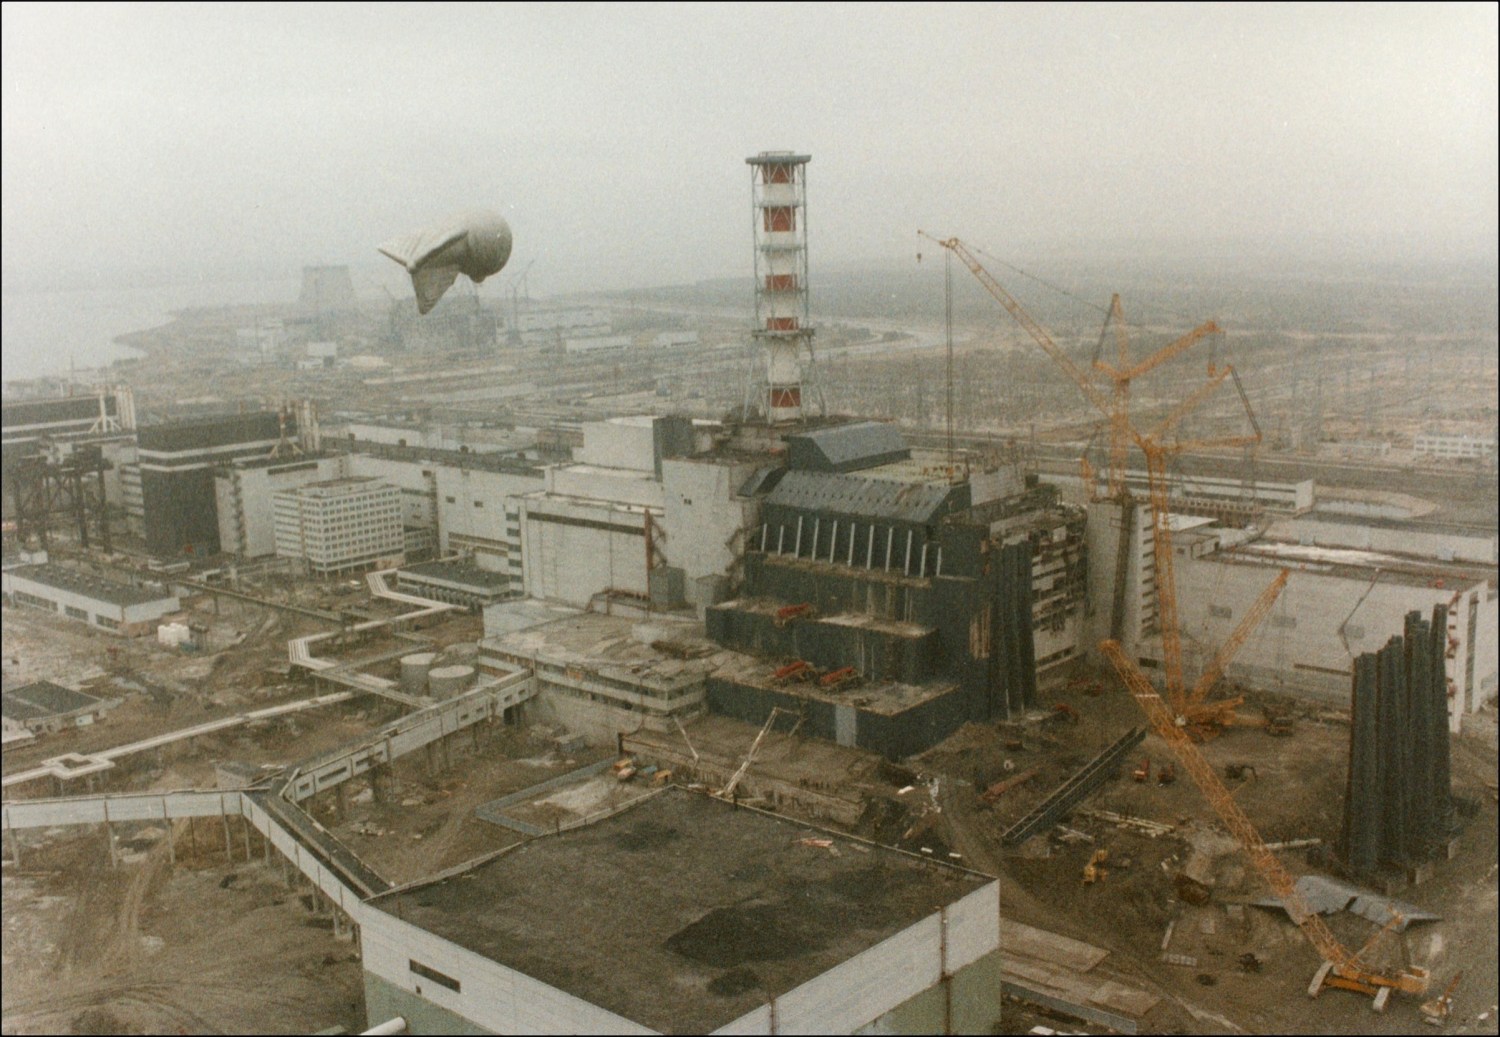 How Vasily Ignatenko Perished At 25 After Bravely Fighting The Chernobyl Fires